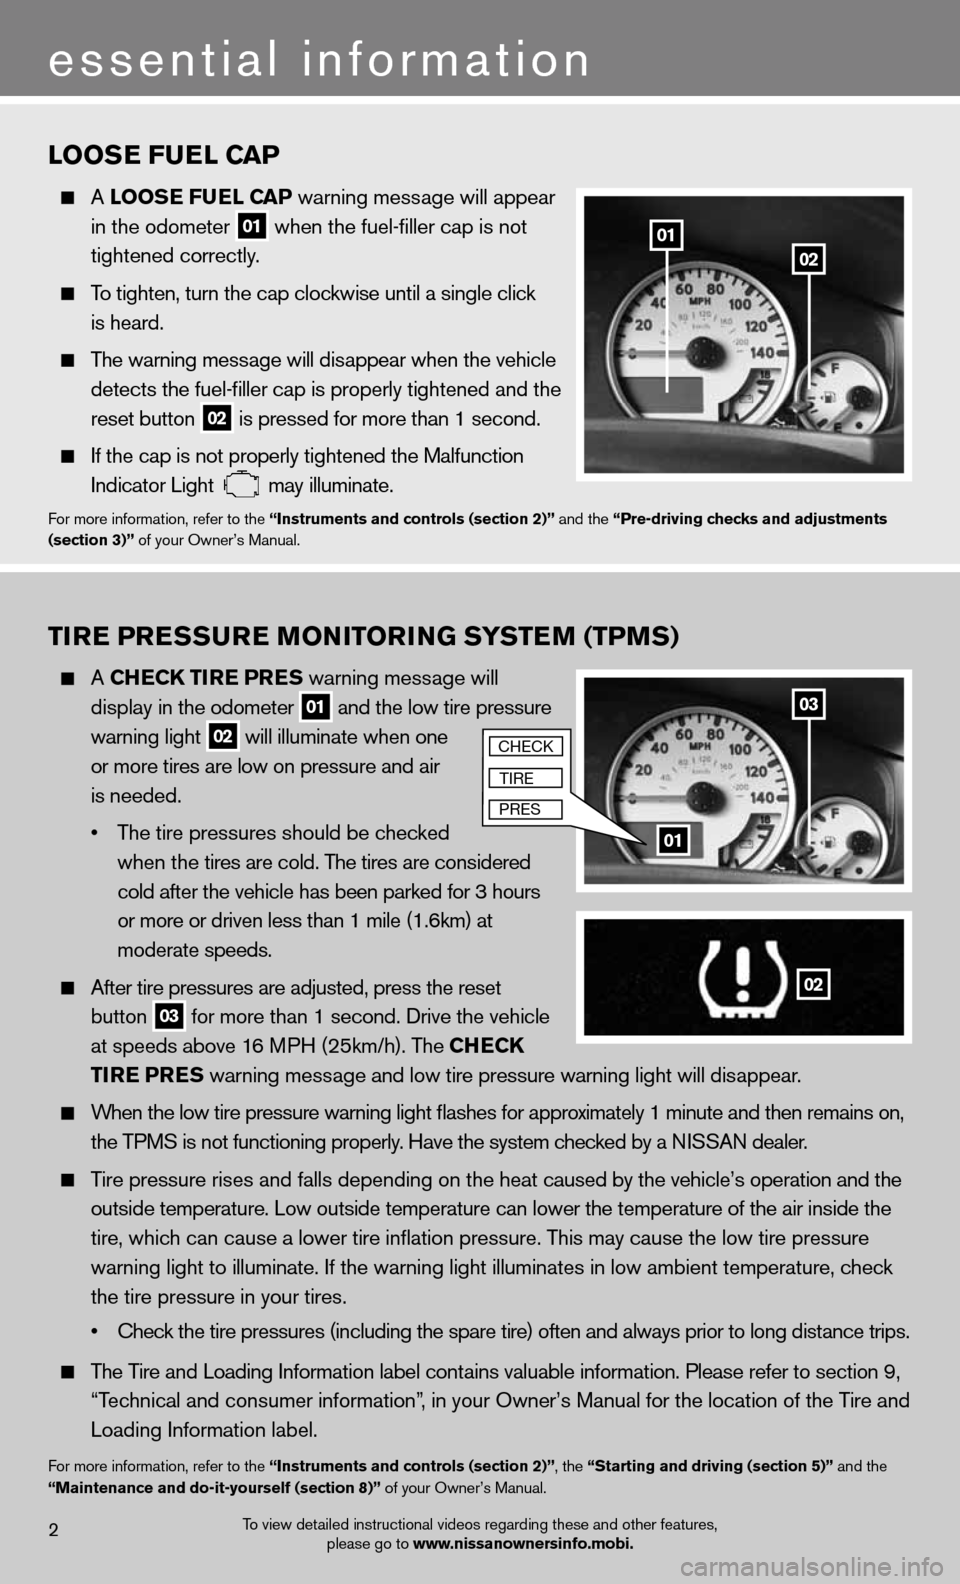 NISSAN XTERRA 2012 N50 / 2.G Quick Reference Guide 2
essential information
0201
03
01
loosE fuEl C aP
  A  loos E fuEl CaP warning message will appear 
    in the odometer
 
01 when the fuel-filler cap is not 
    tightened correctly.
 
  To tighten, 